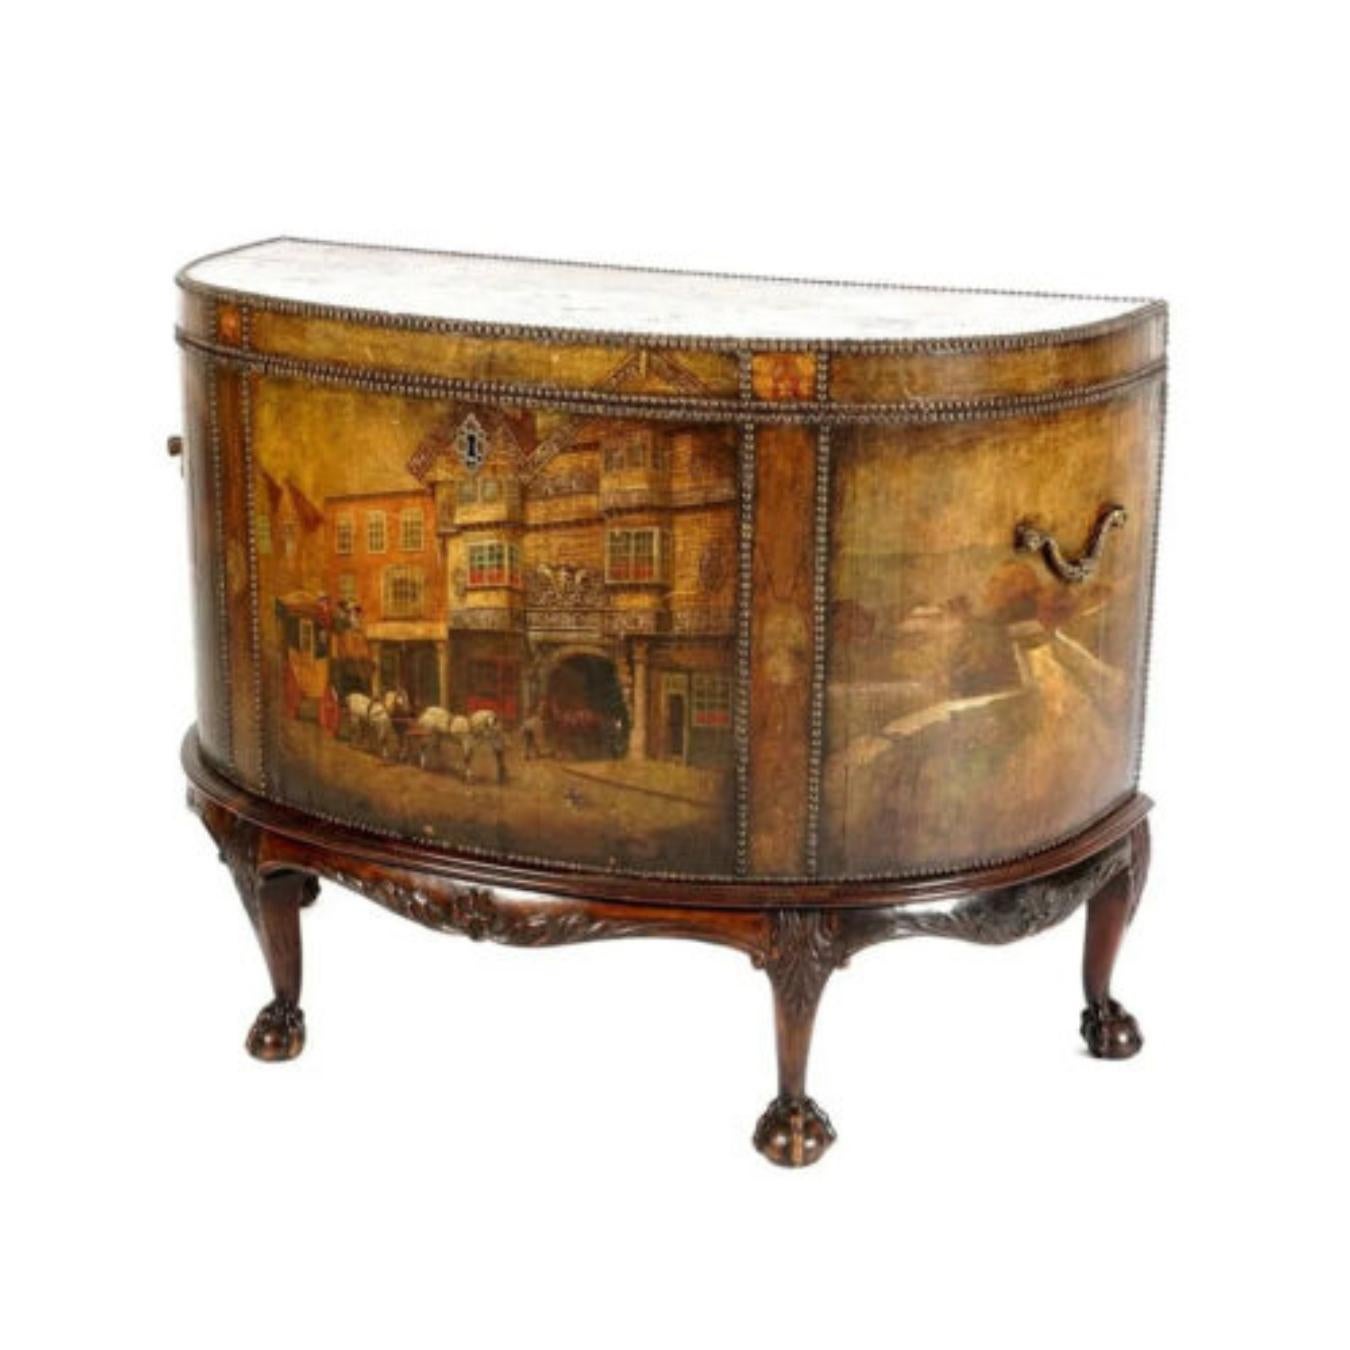 Gorgeous Antique Demilune chest, paint decorated scenes, Clad Leather, Brass Hand., 1800s, 19th Century!

Demilune chest clad in paint decorated clad leather, hinged lid top with interior genre scene, front city street scene, sides with landscapes,